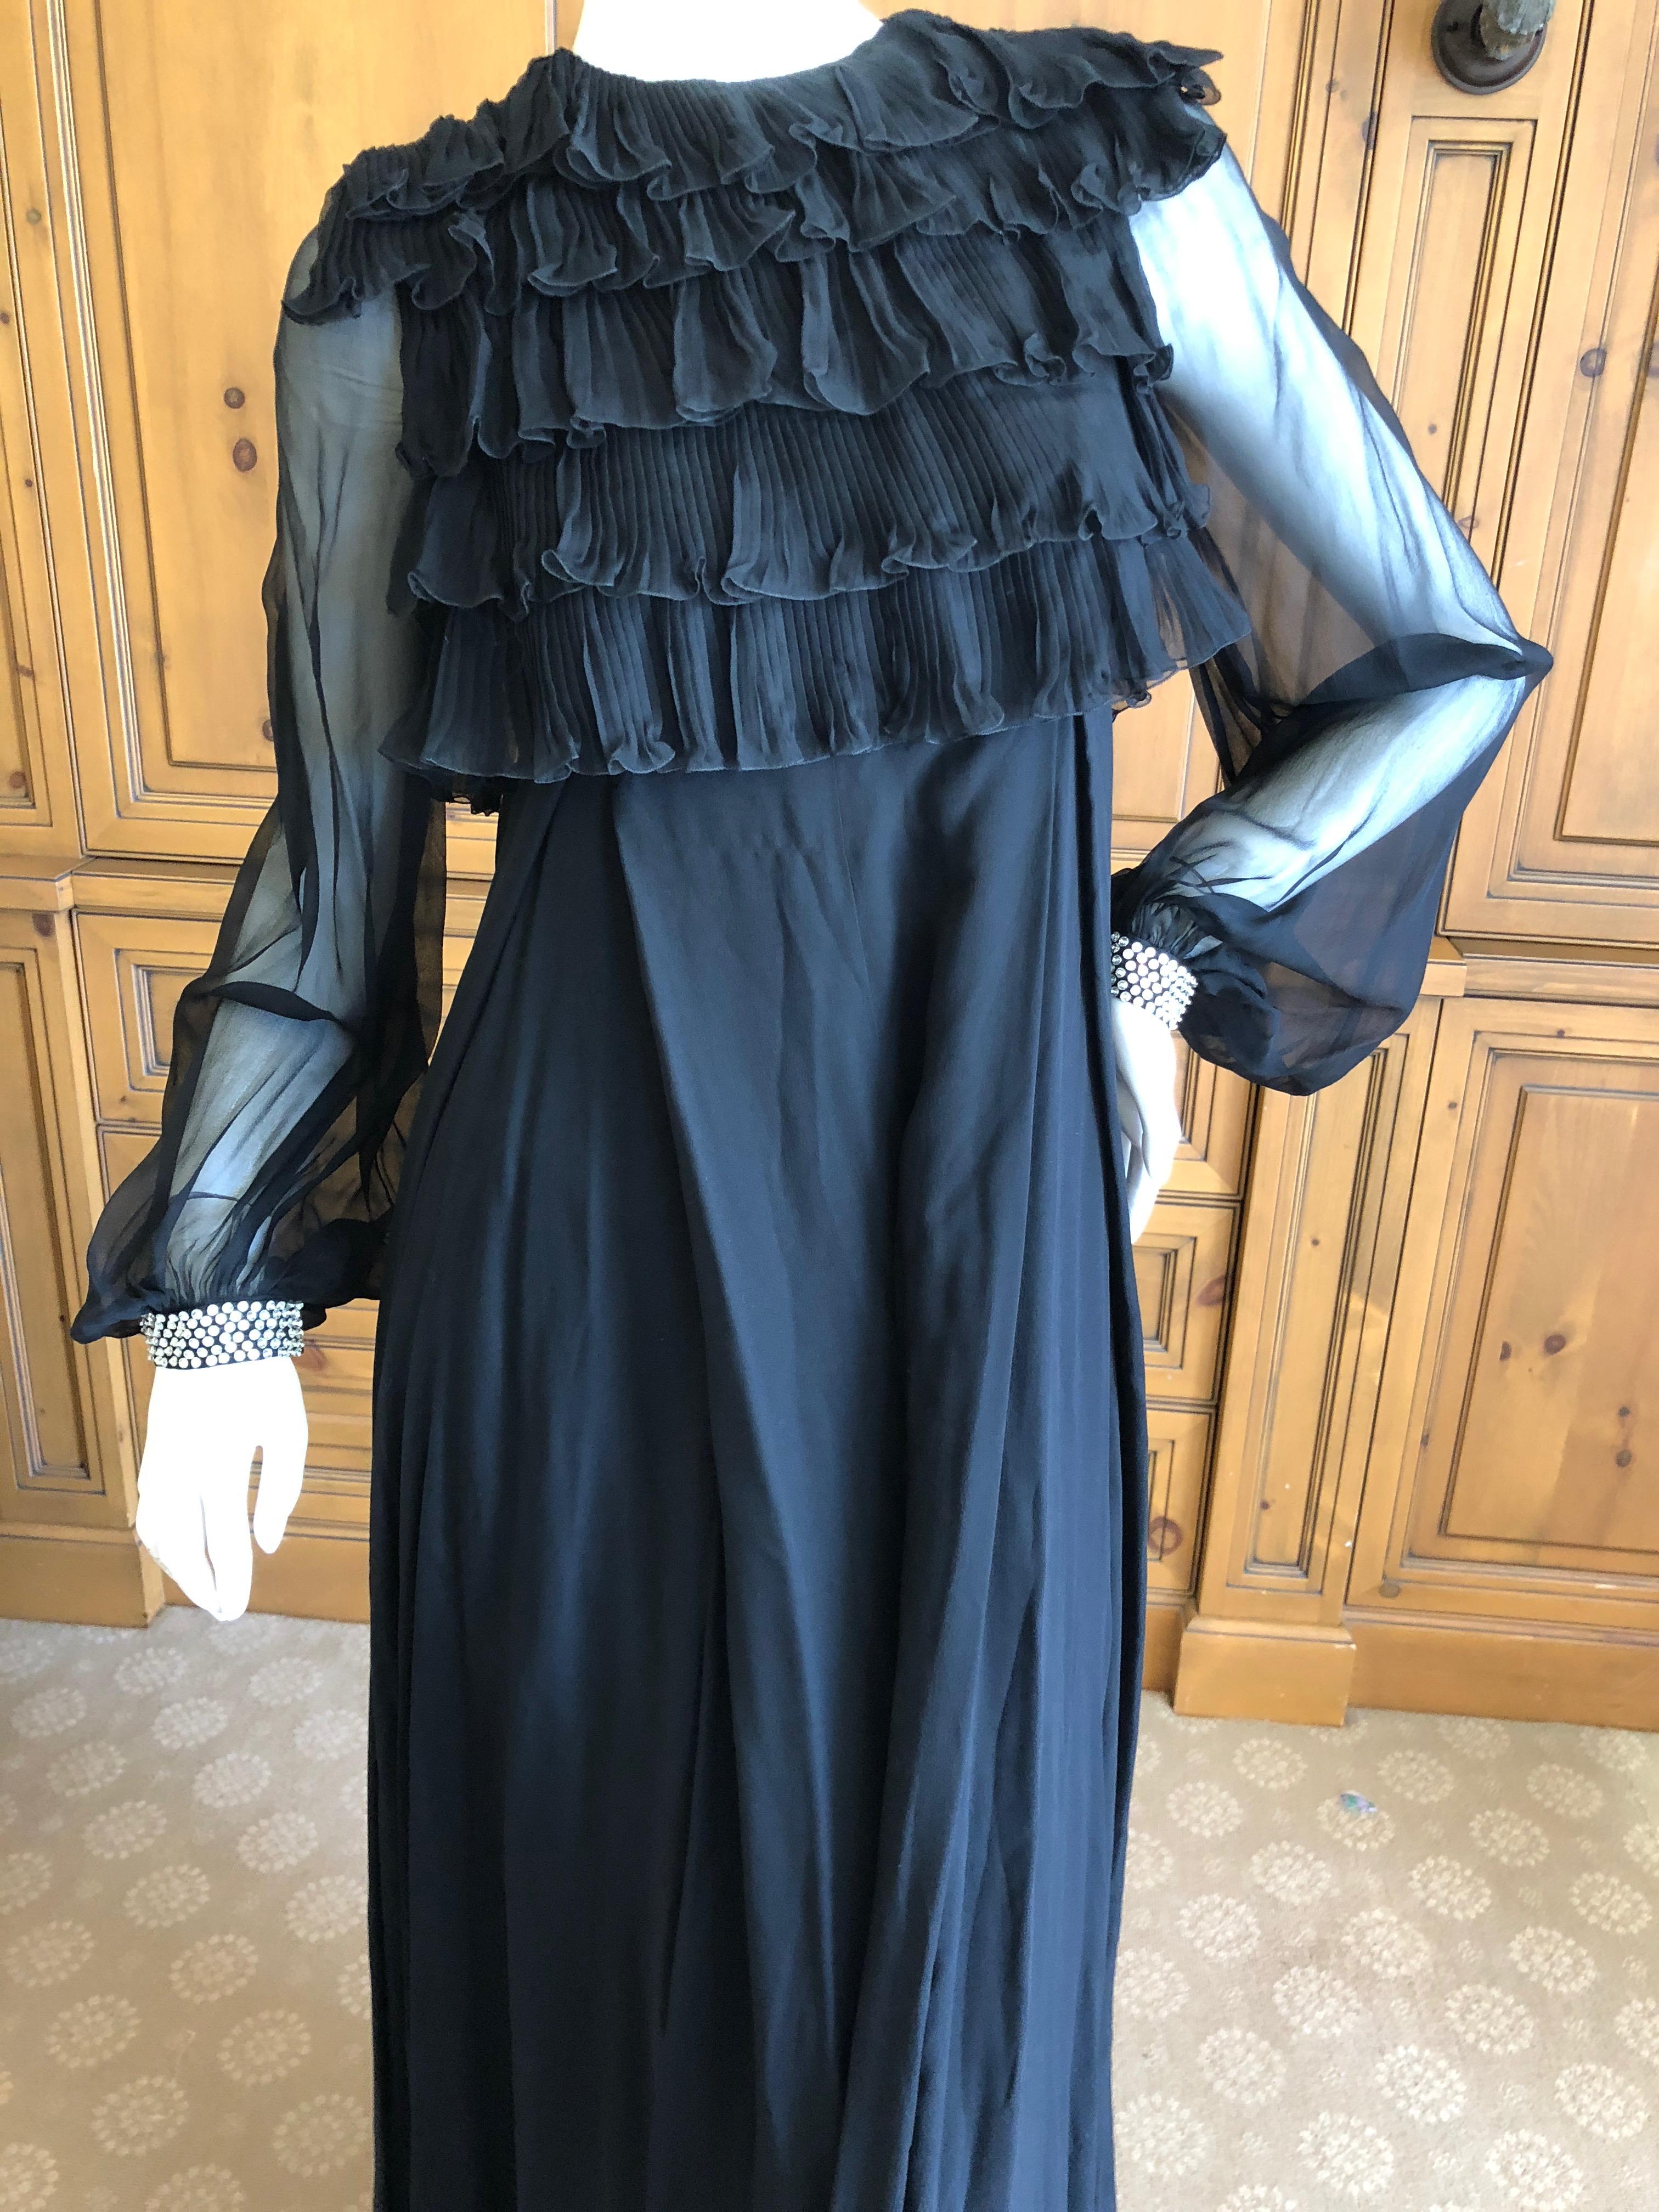 Cardinali 1970's Black Silk Evening Dress with Palazzo Pants In Good Condition For Sale In Cloverdale, CA